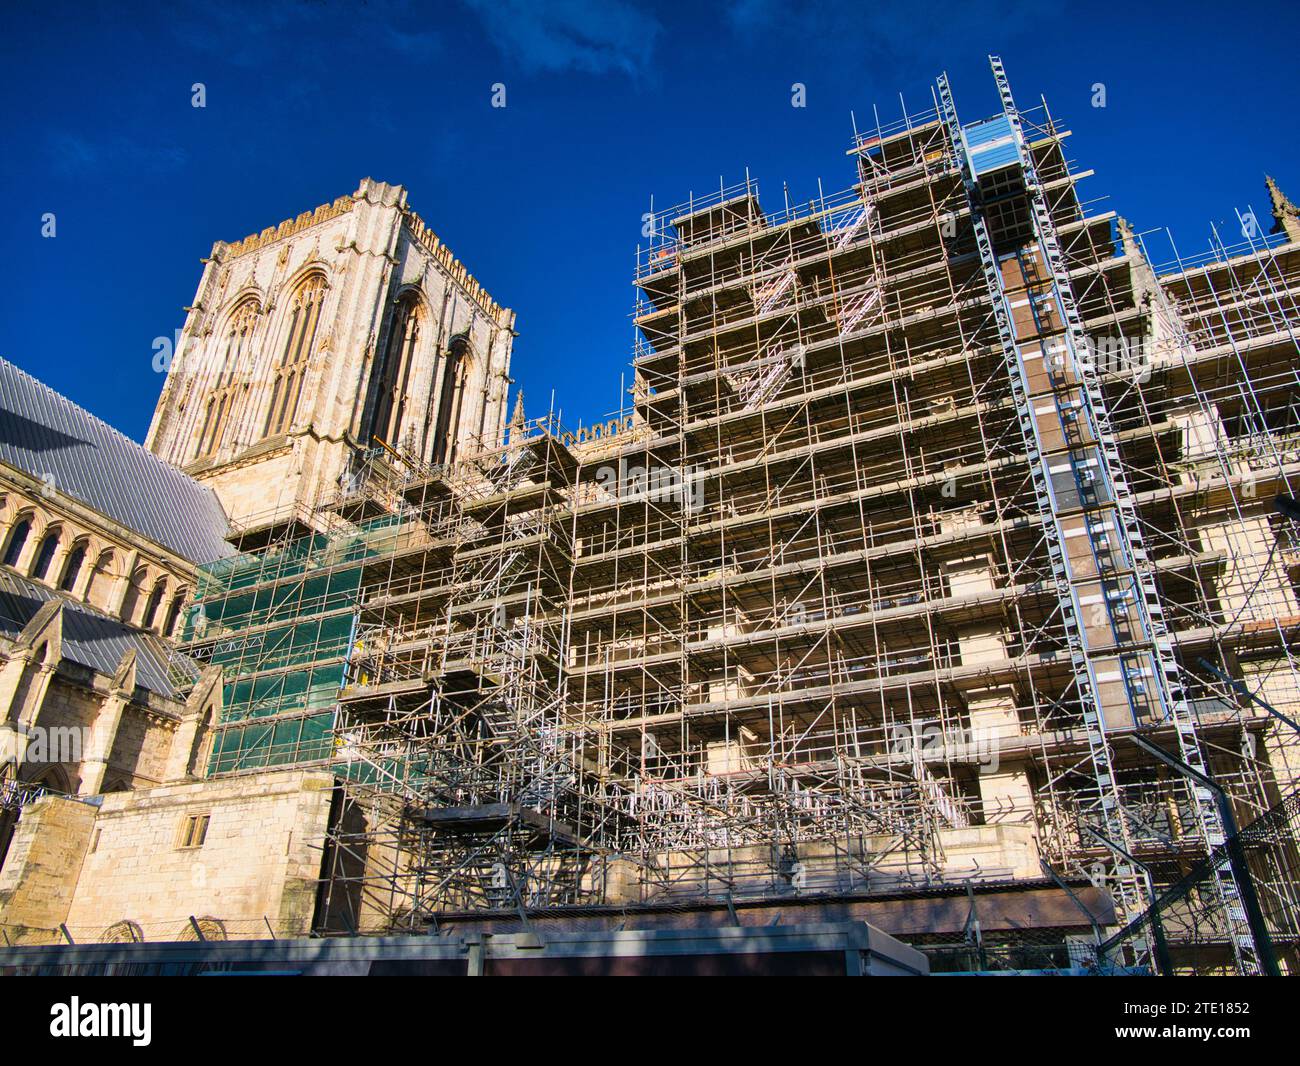 York, UK - Nov 24 2023: Extensive scaffolding and a service lift at York Minster as conservation work on the building's exterior continues. Taken on a Stock Photo